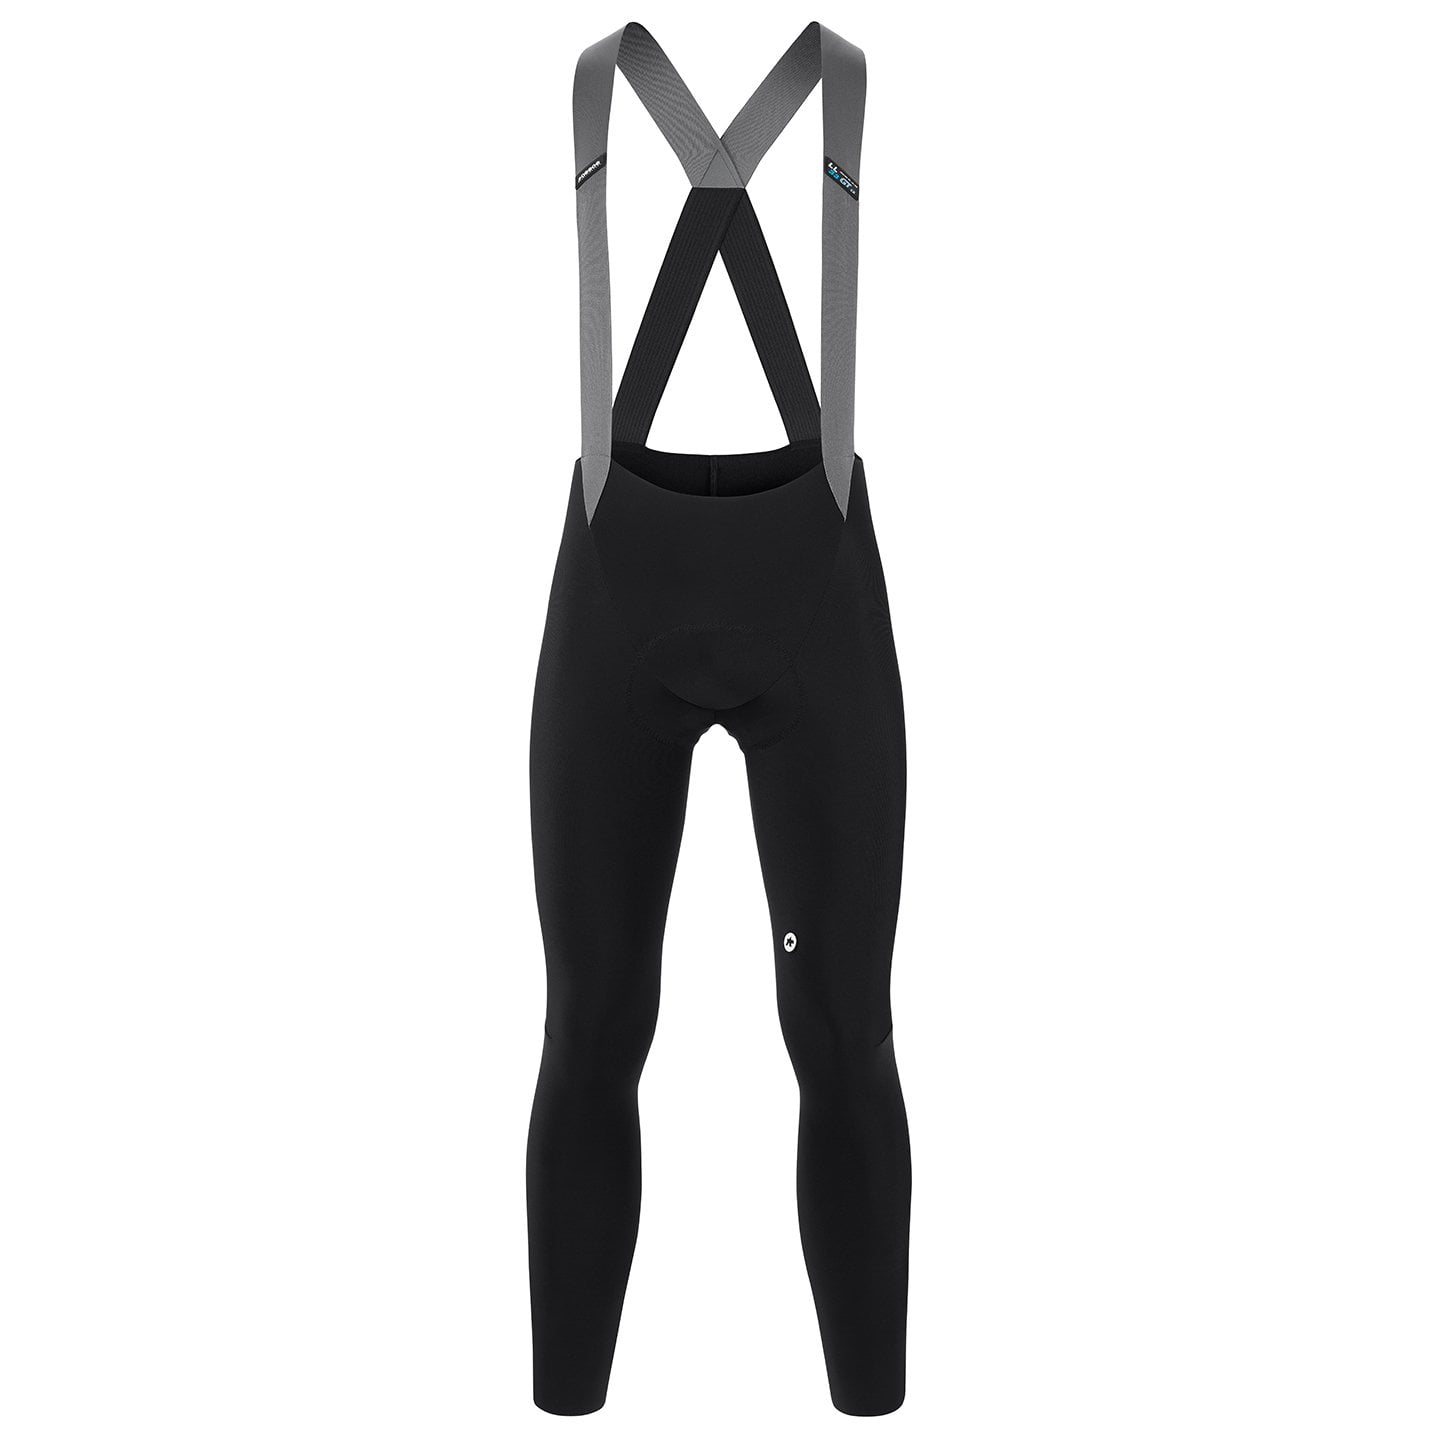 ASSOS Mille GT Winter C2 Bib Tights Bib Tights, for men, size 3XL, Cycle trousers, Cycle gear